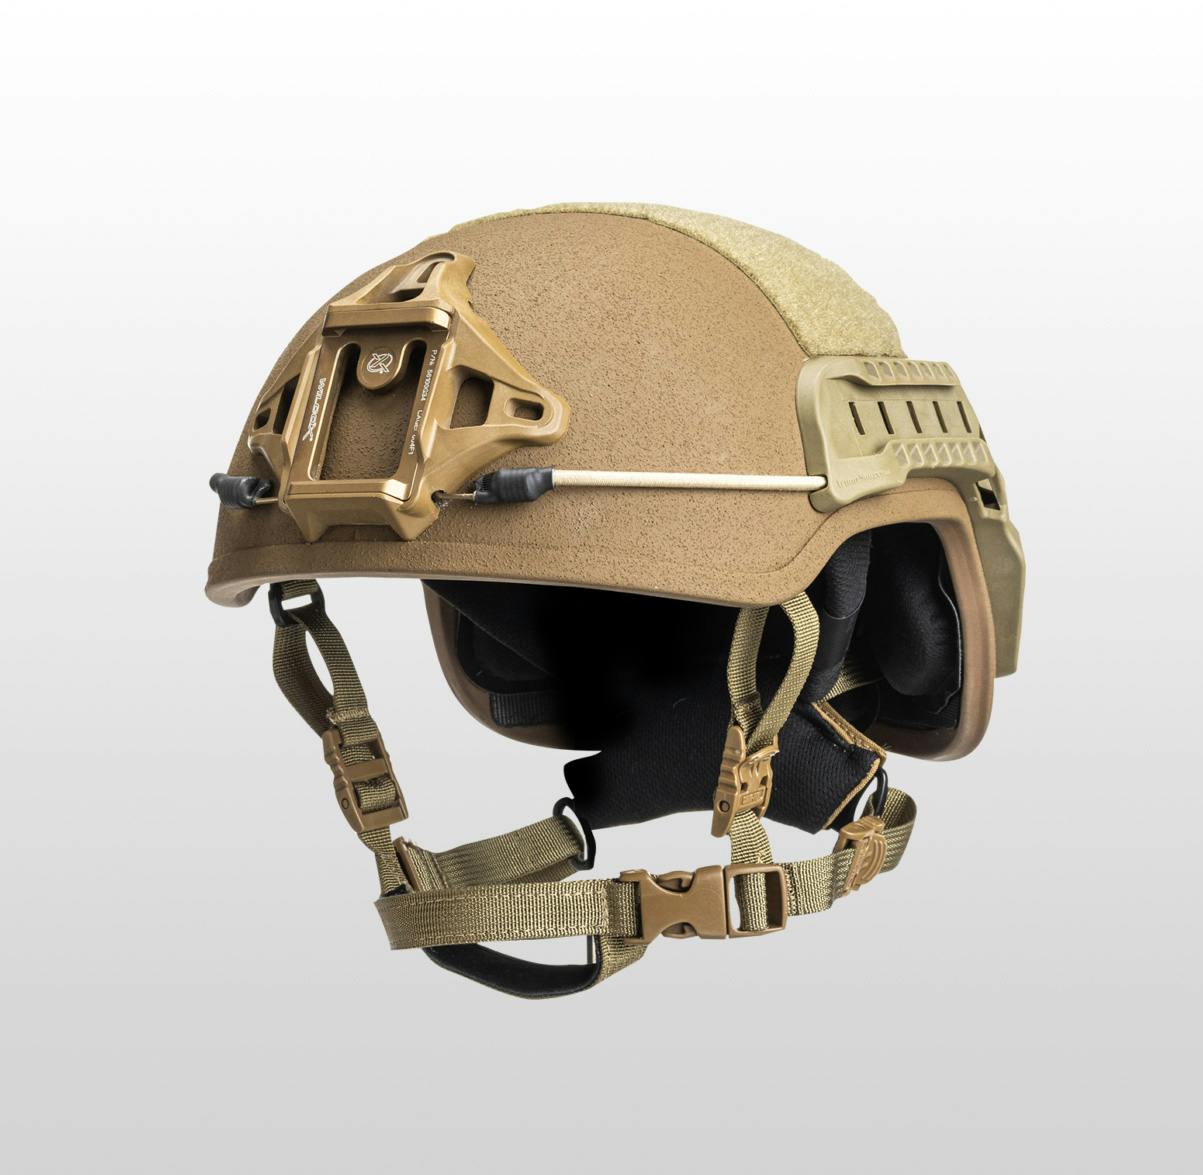 Military helmet floating in photograph